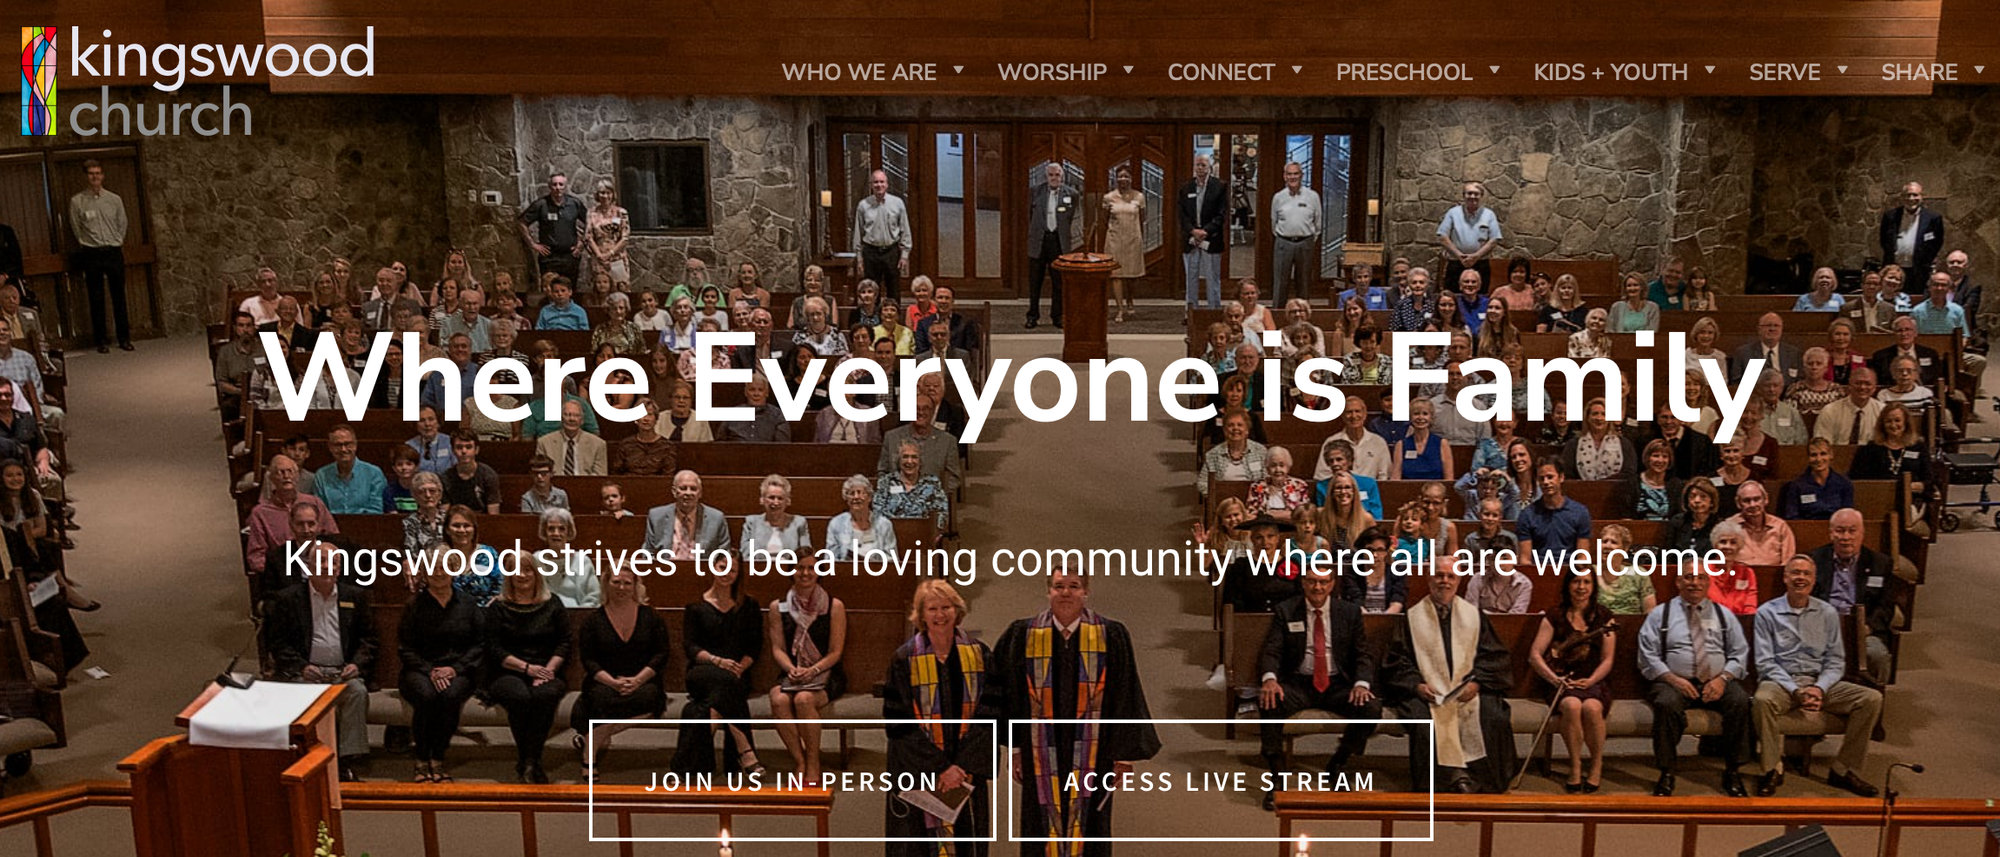 Kingswood Church showcases virtual events on their website